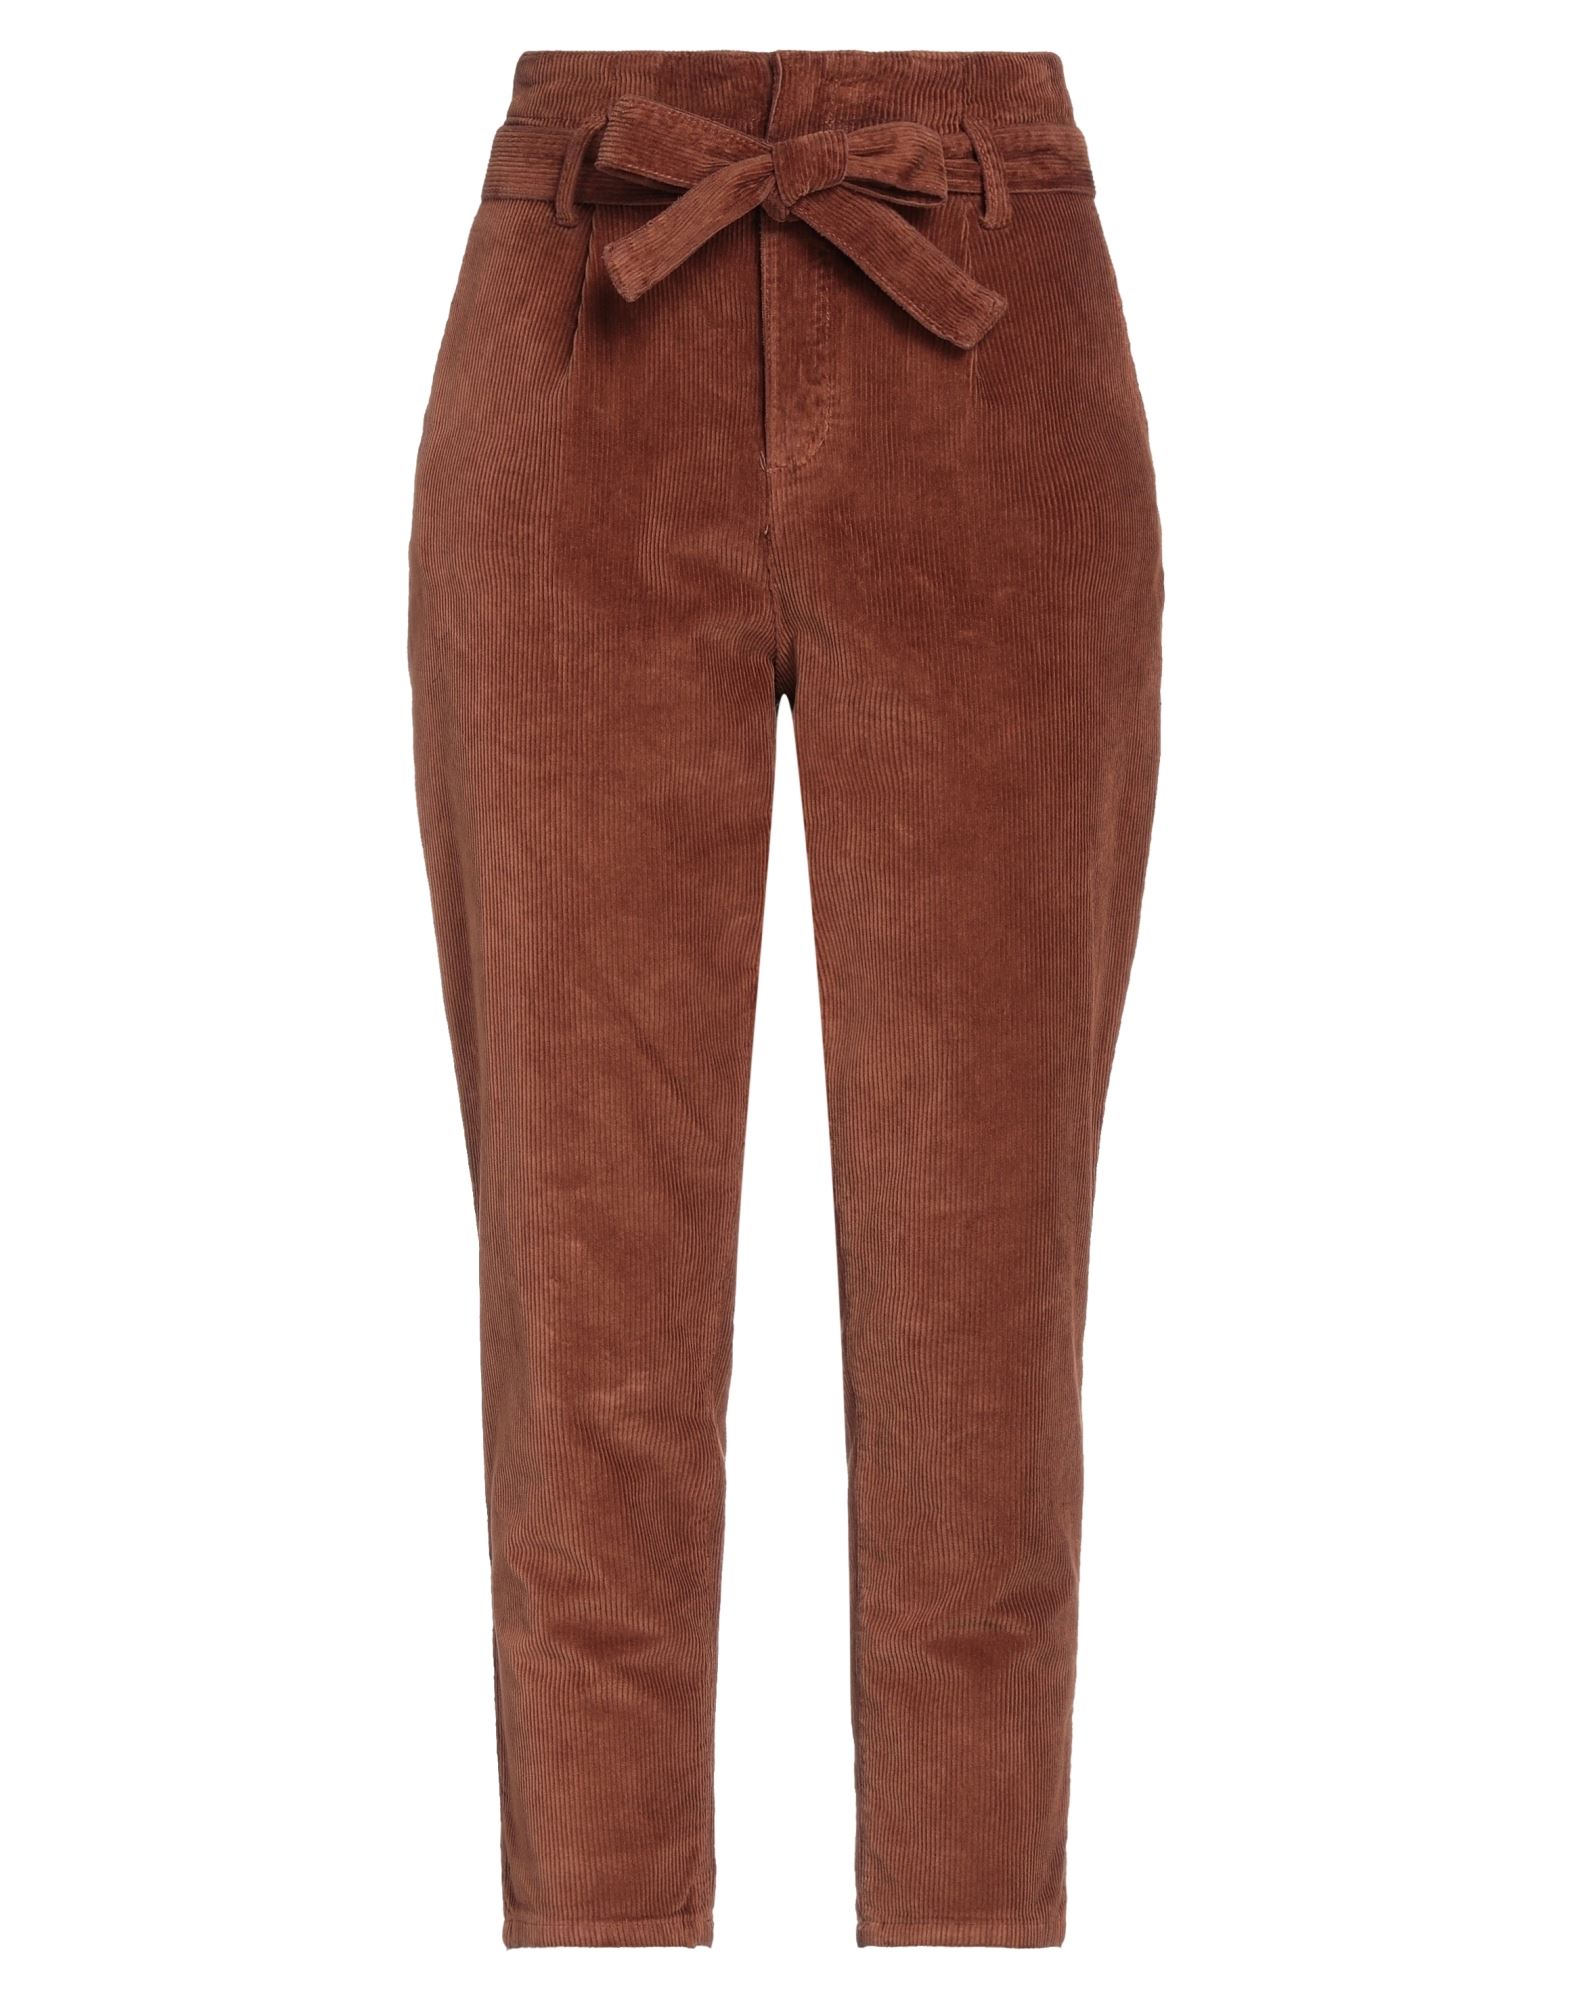 White Wise Pants In Brown